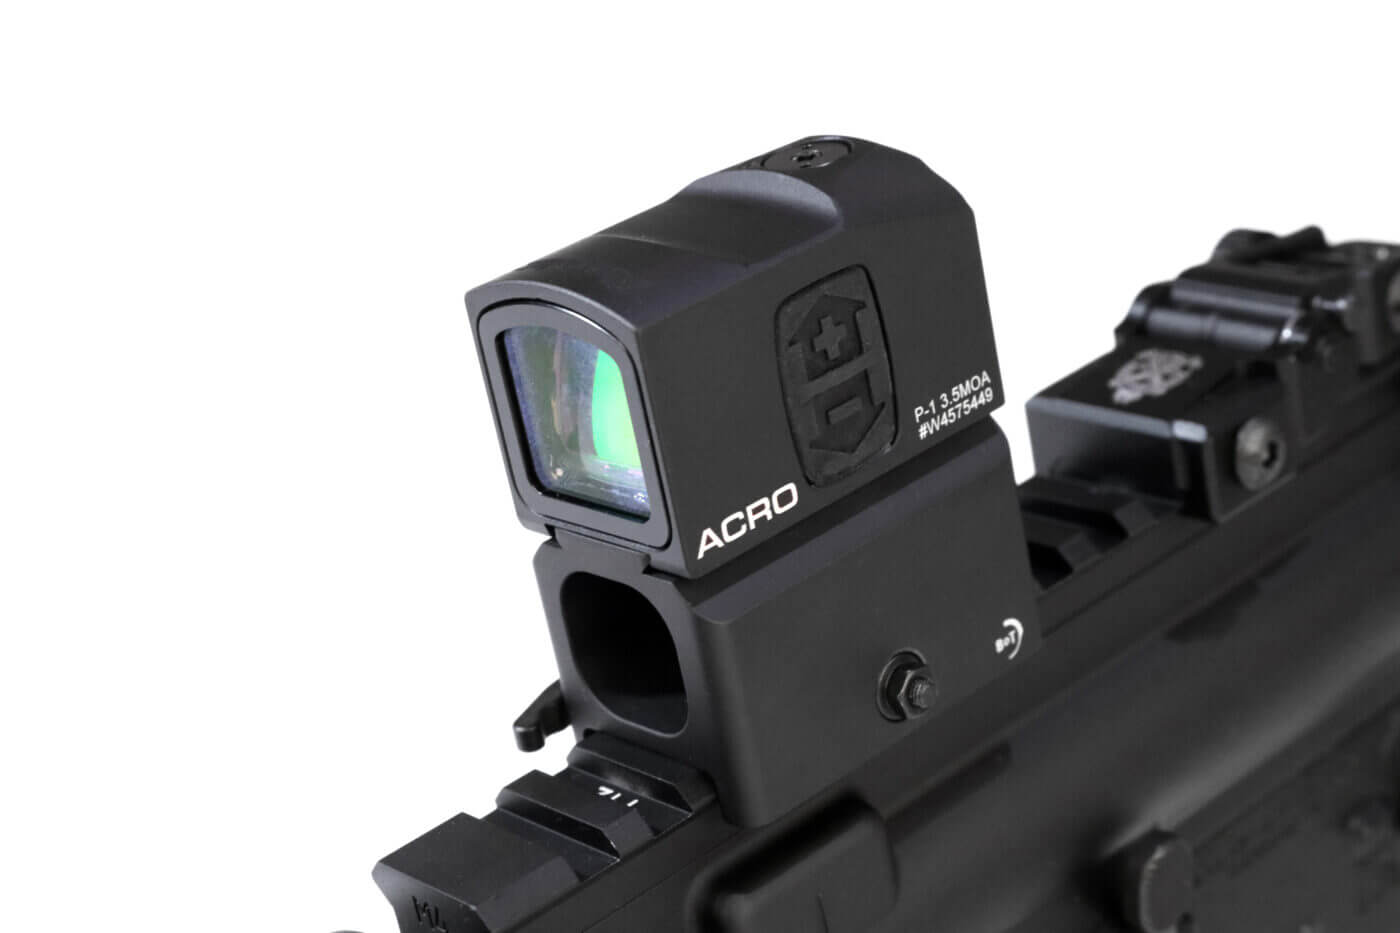 In this photo, we see the writer mounted the red dot sight on his SAINT rifle for the Aimpoint ACRO P-1 review. The optic is mounted on a riser on the Picatinny rail. The rear iron sight is visible.